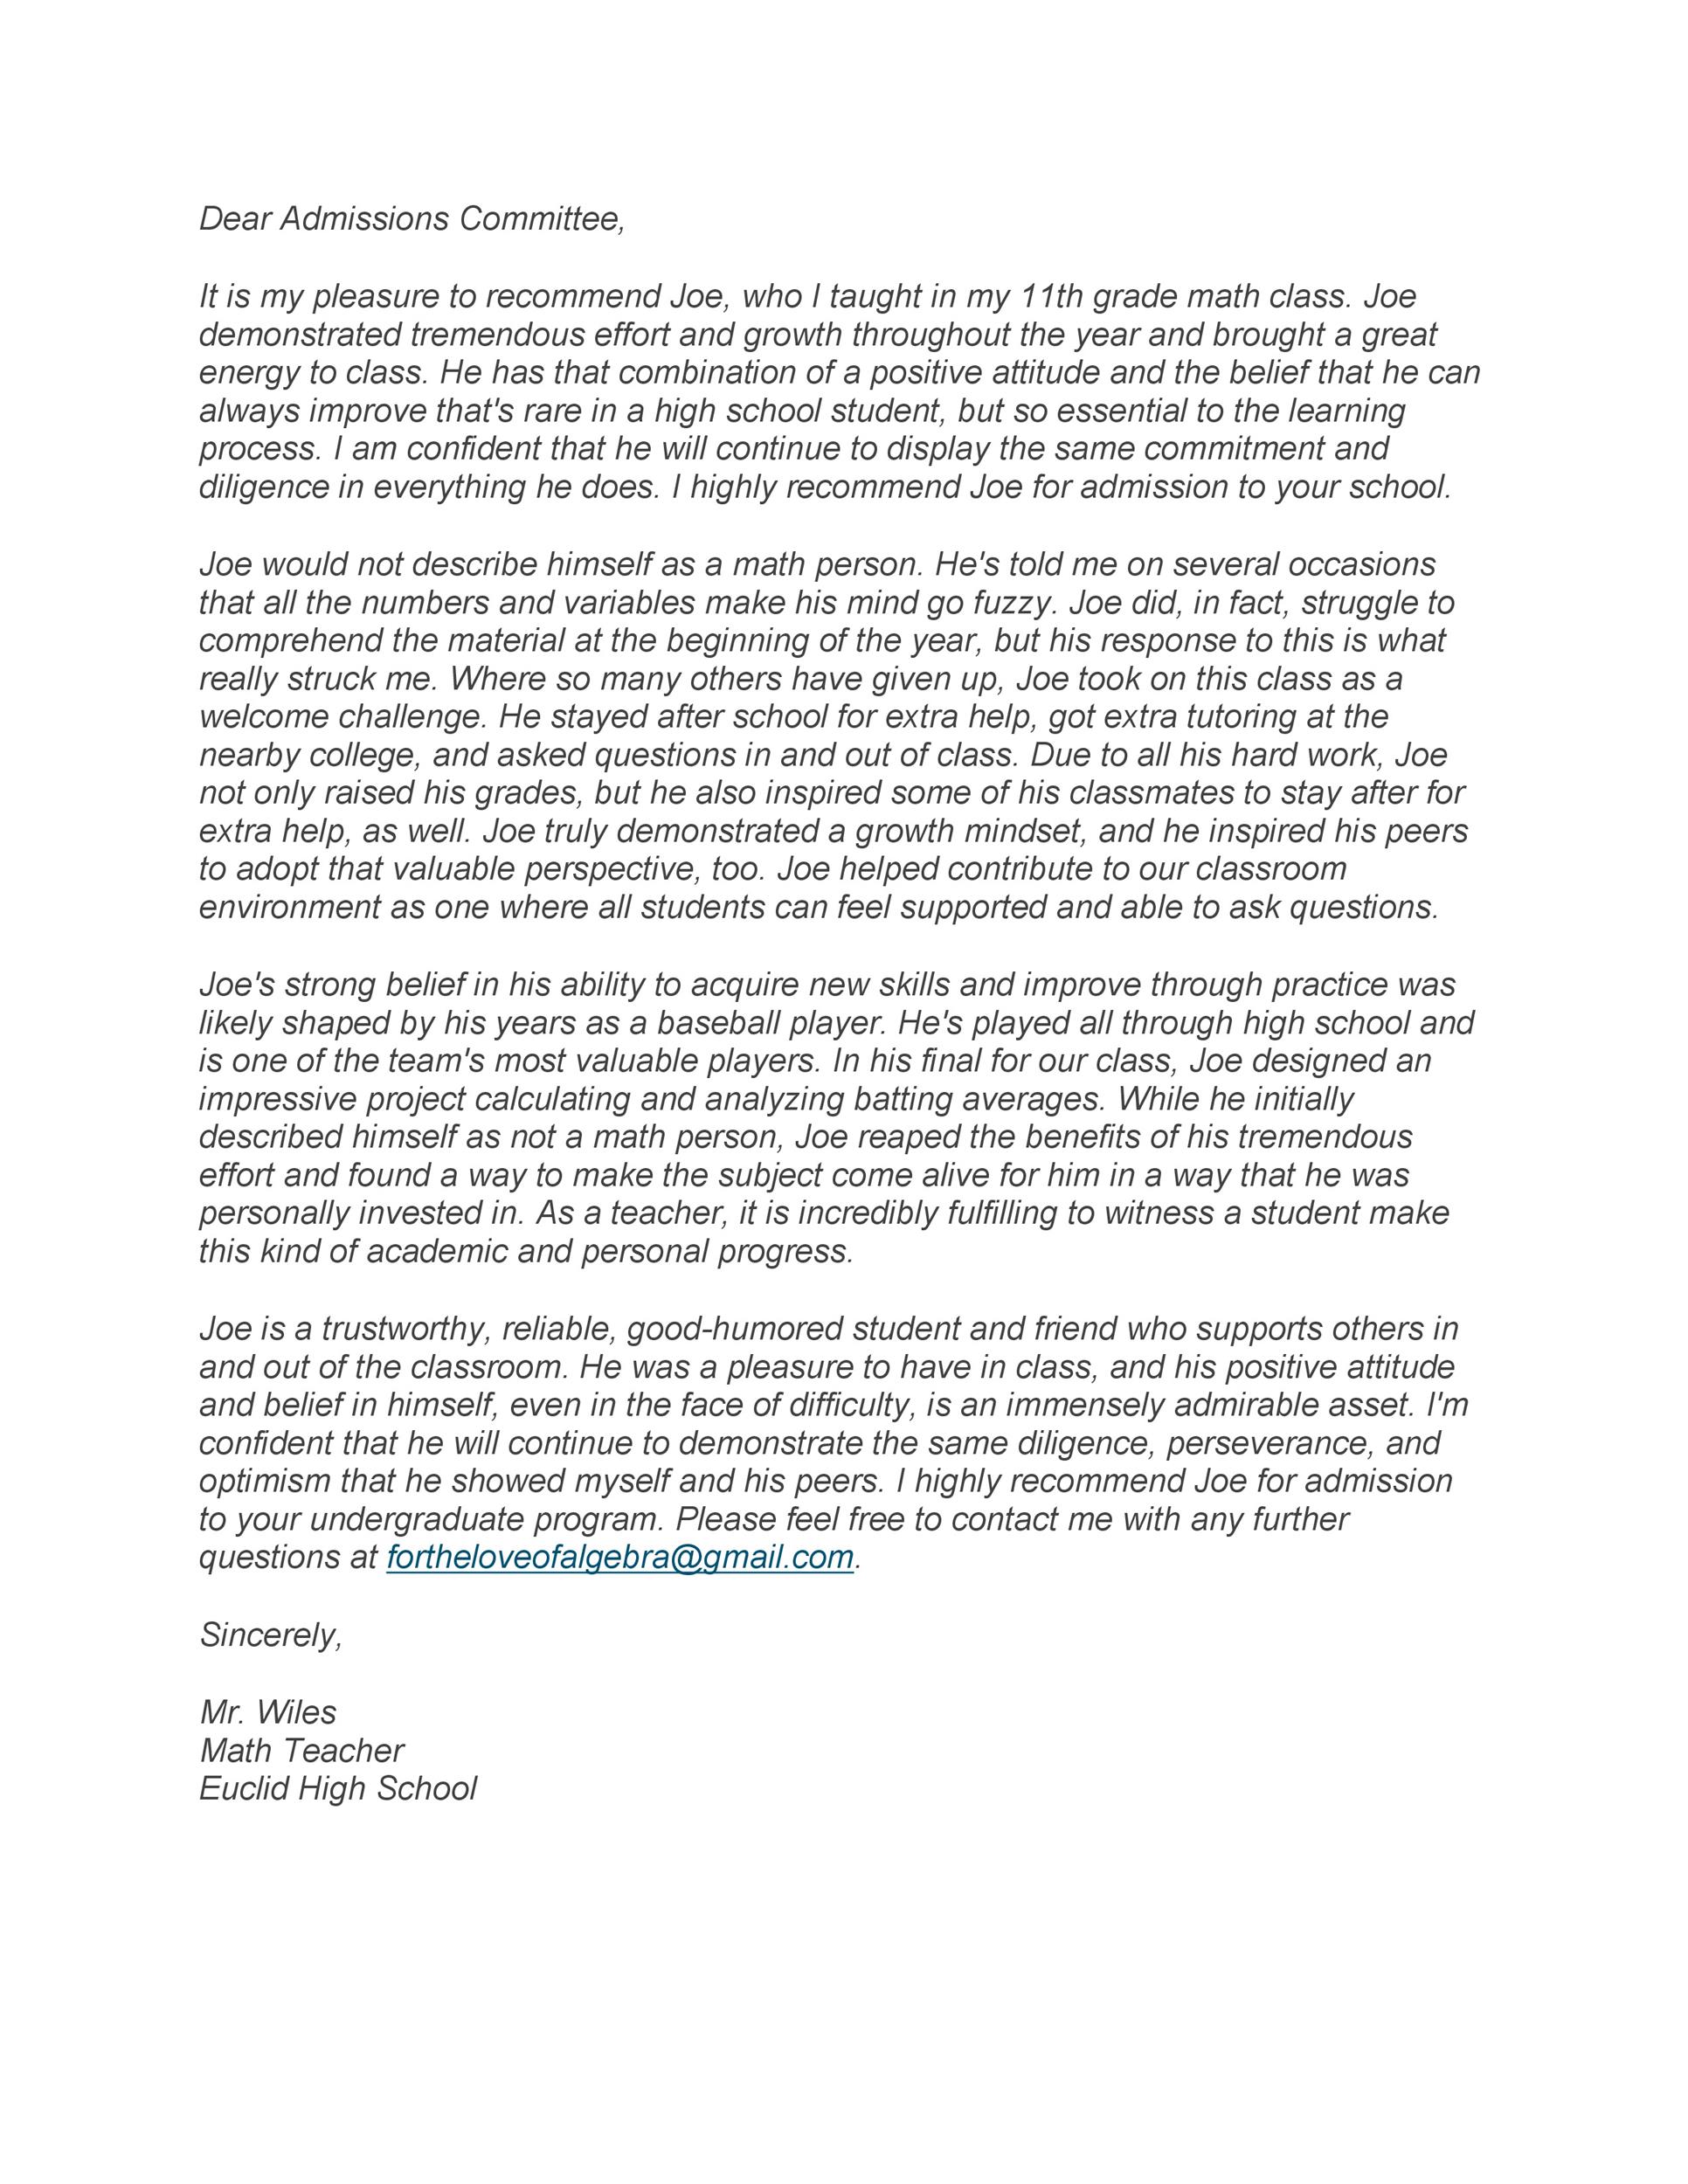 Recommendation Letter Sample For Student From Professor from templatelab.com